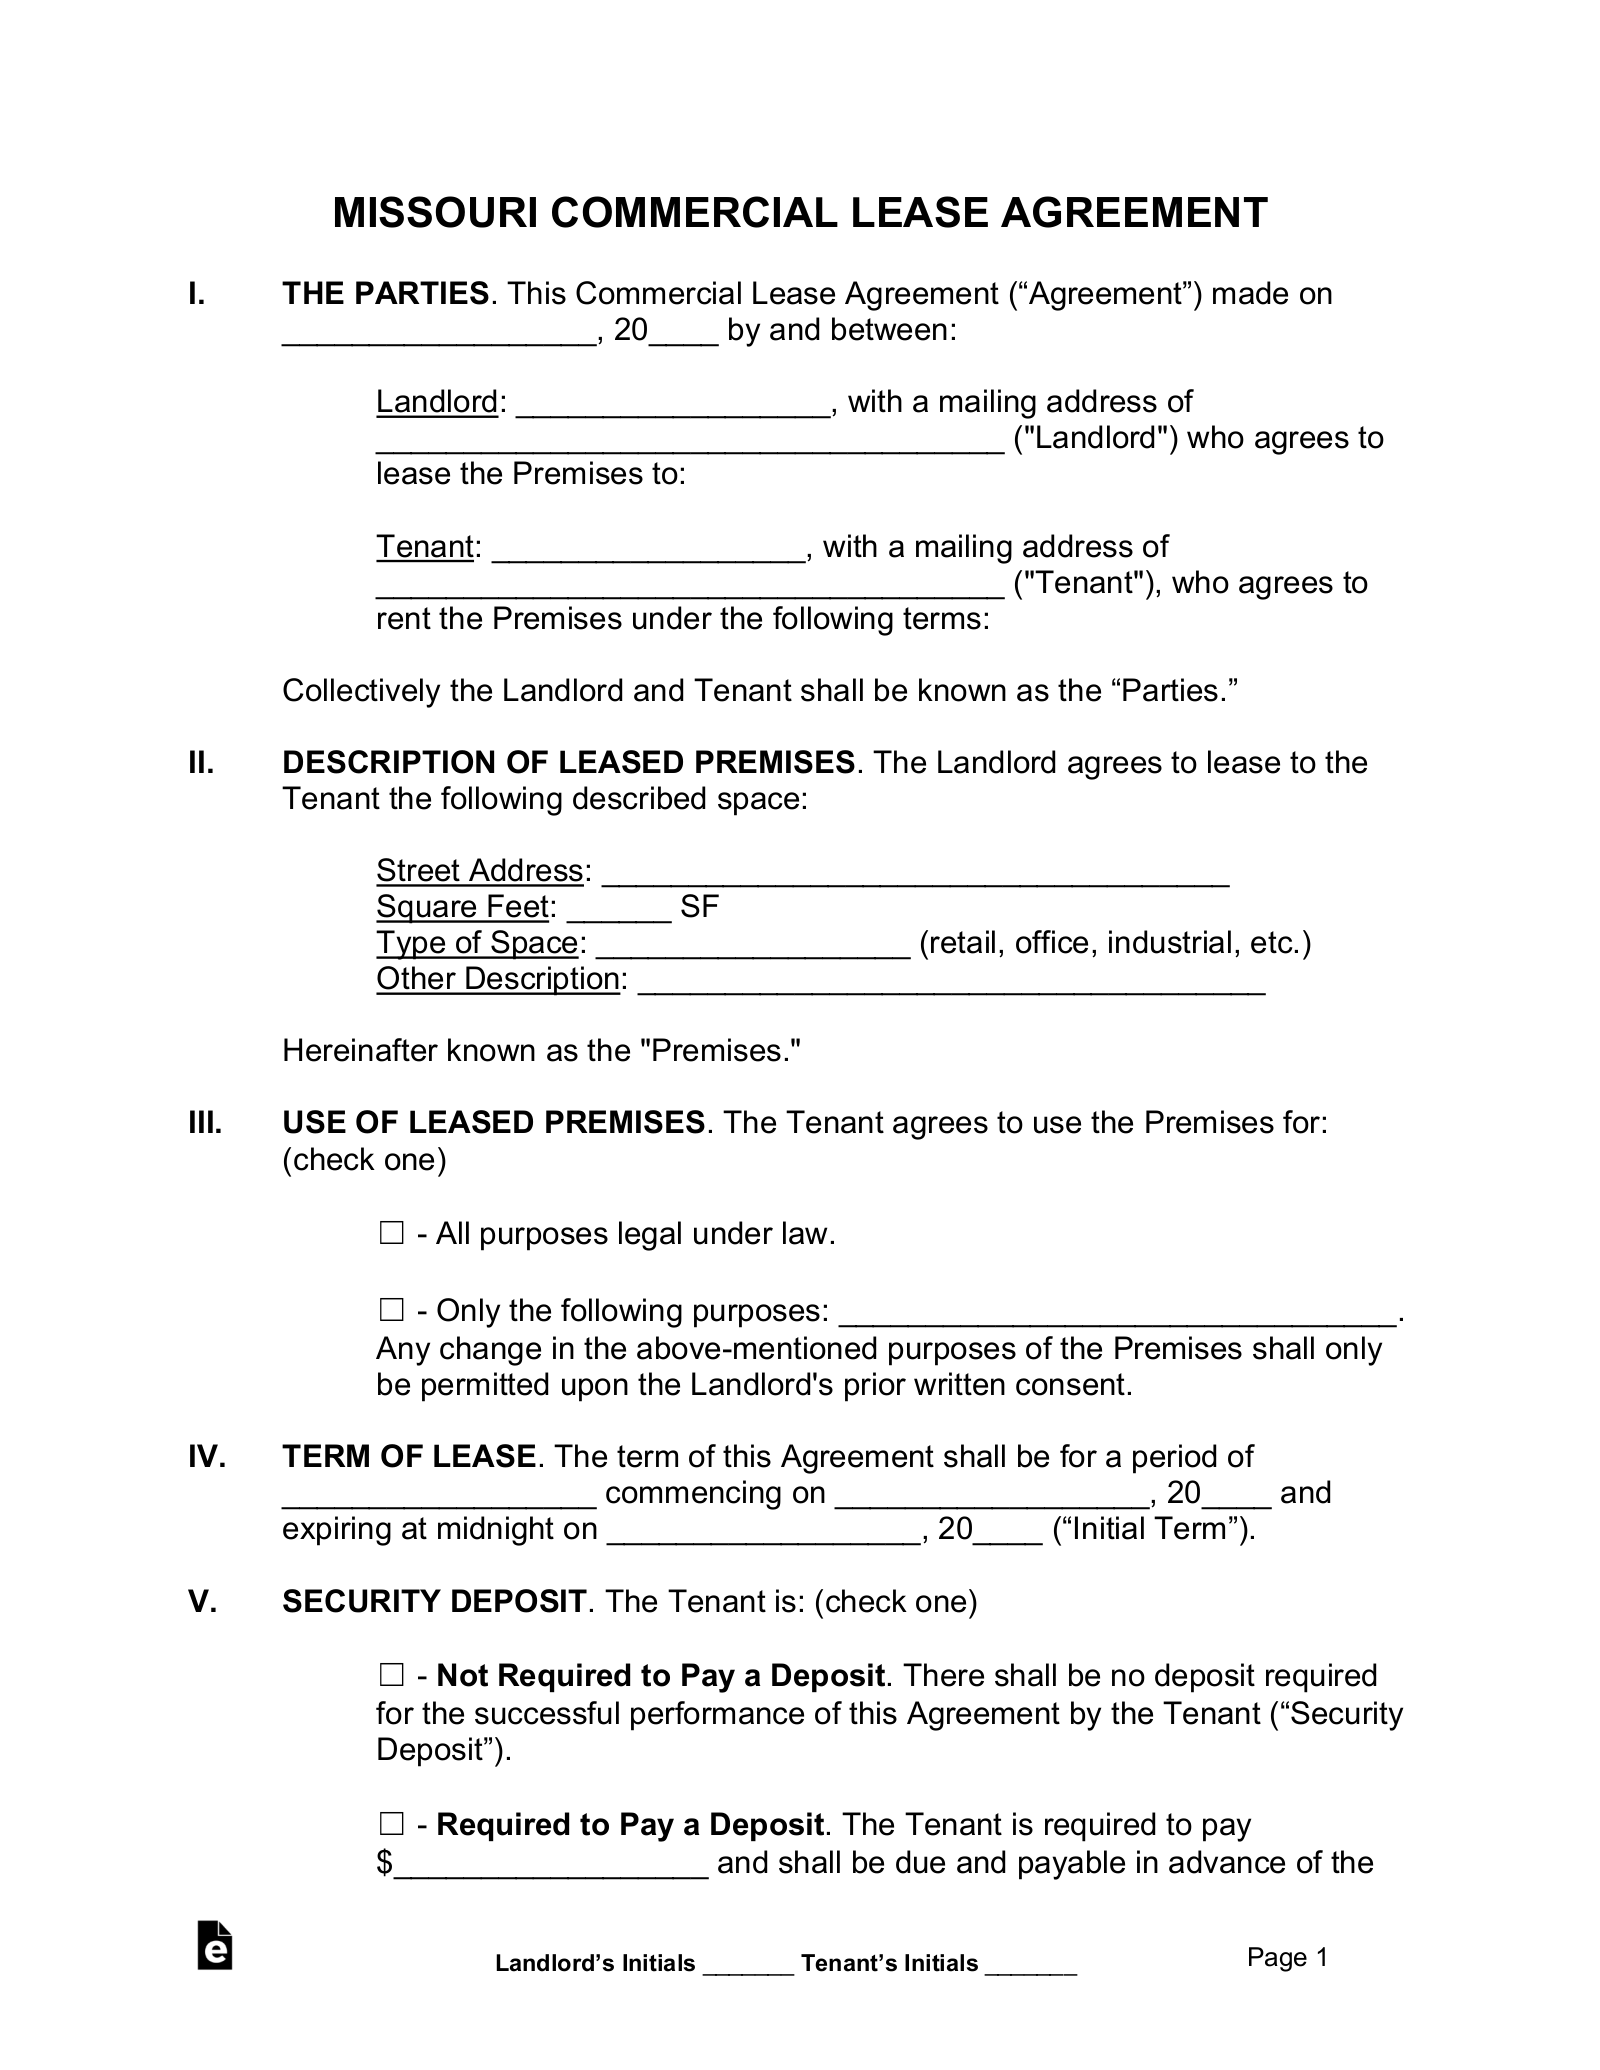 Missouri Commercial Lease Agreement Template